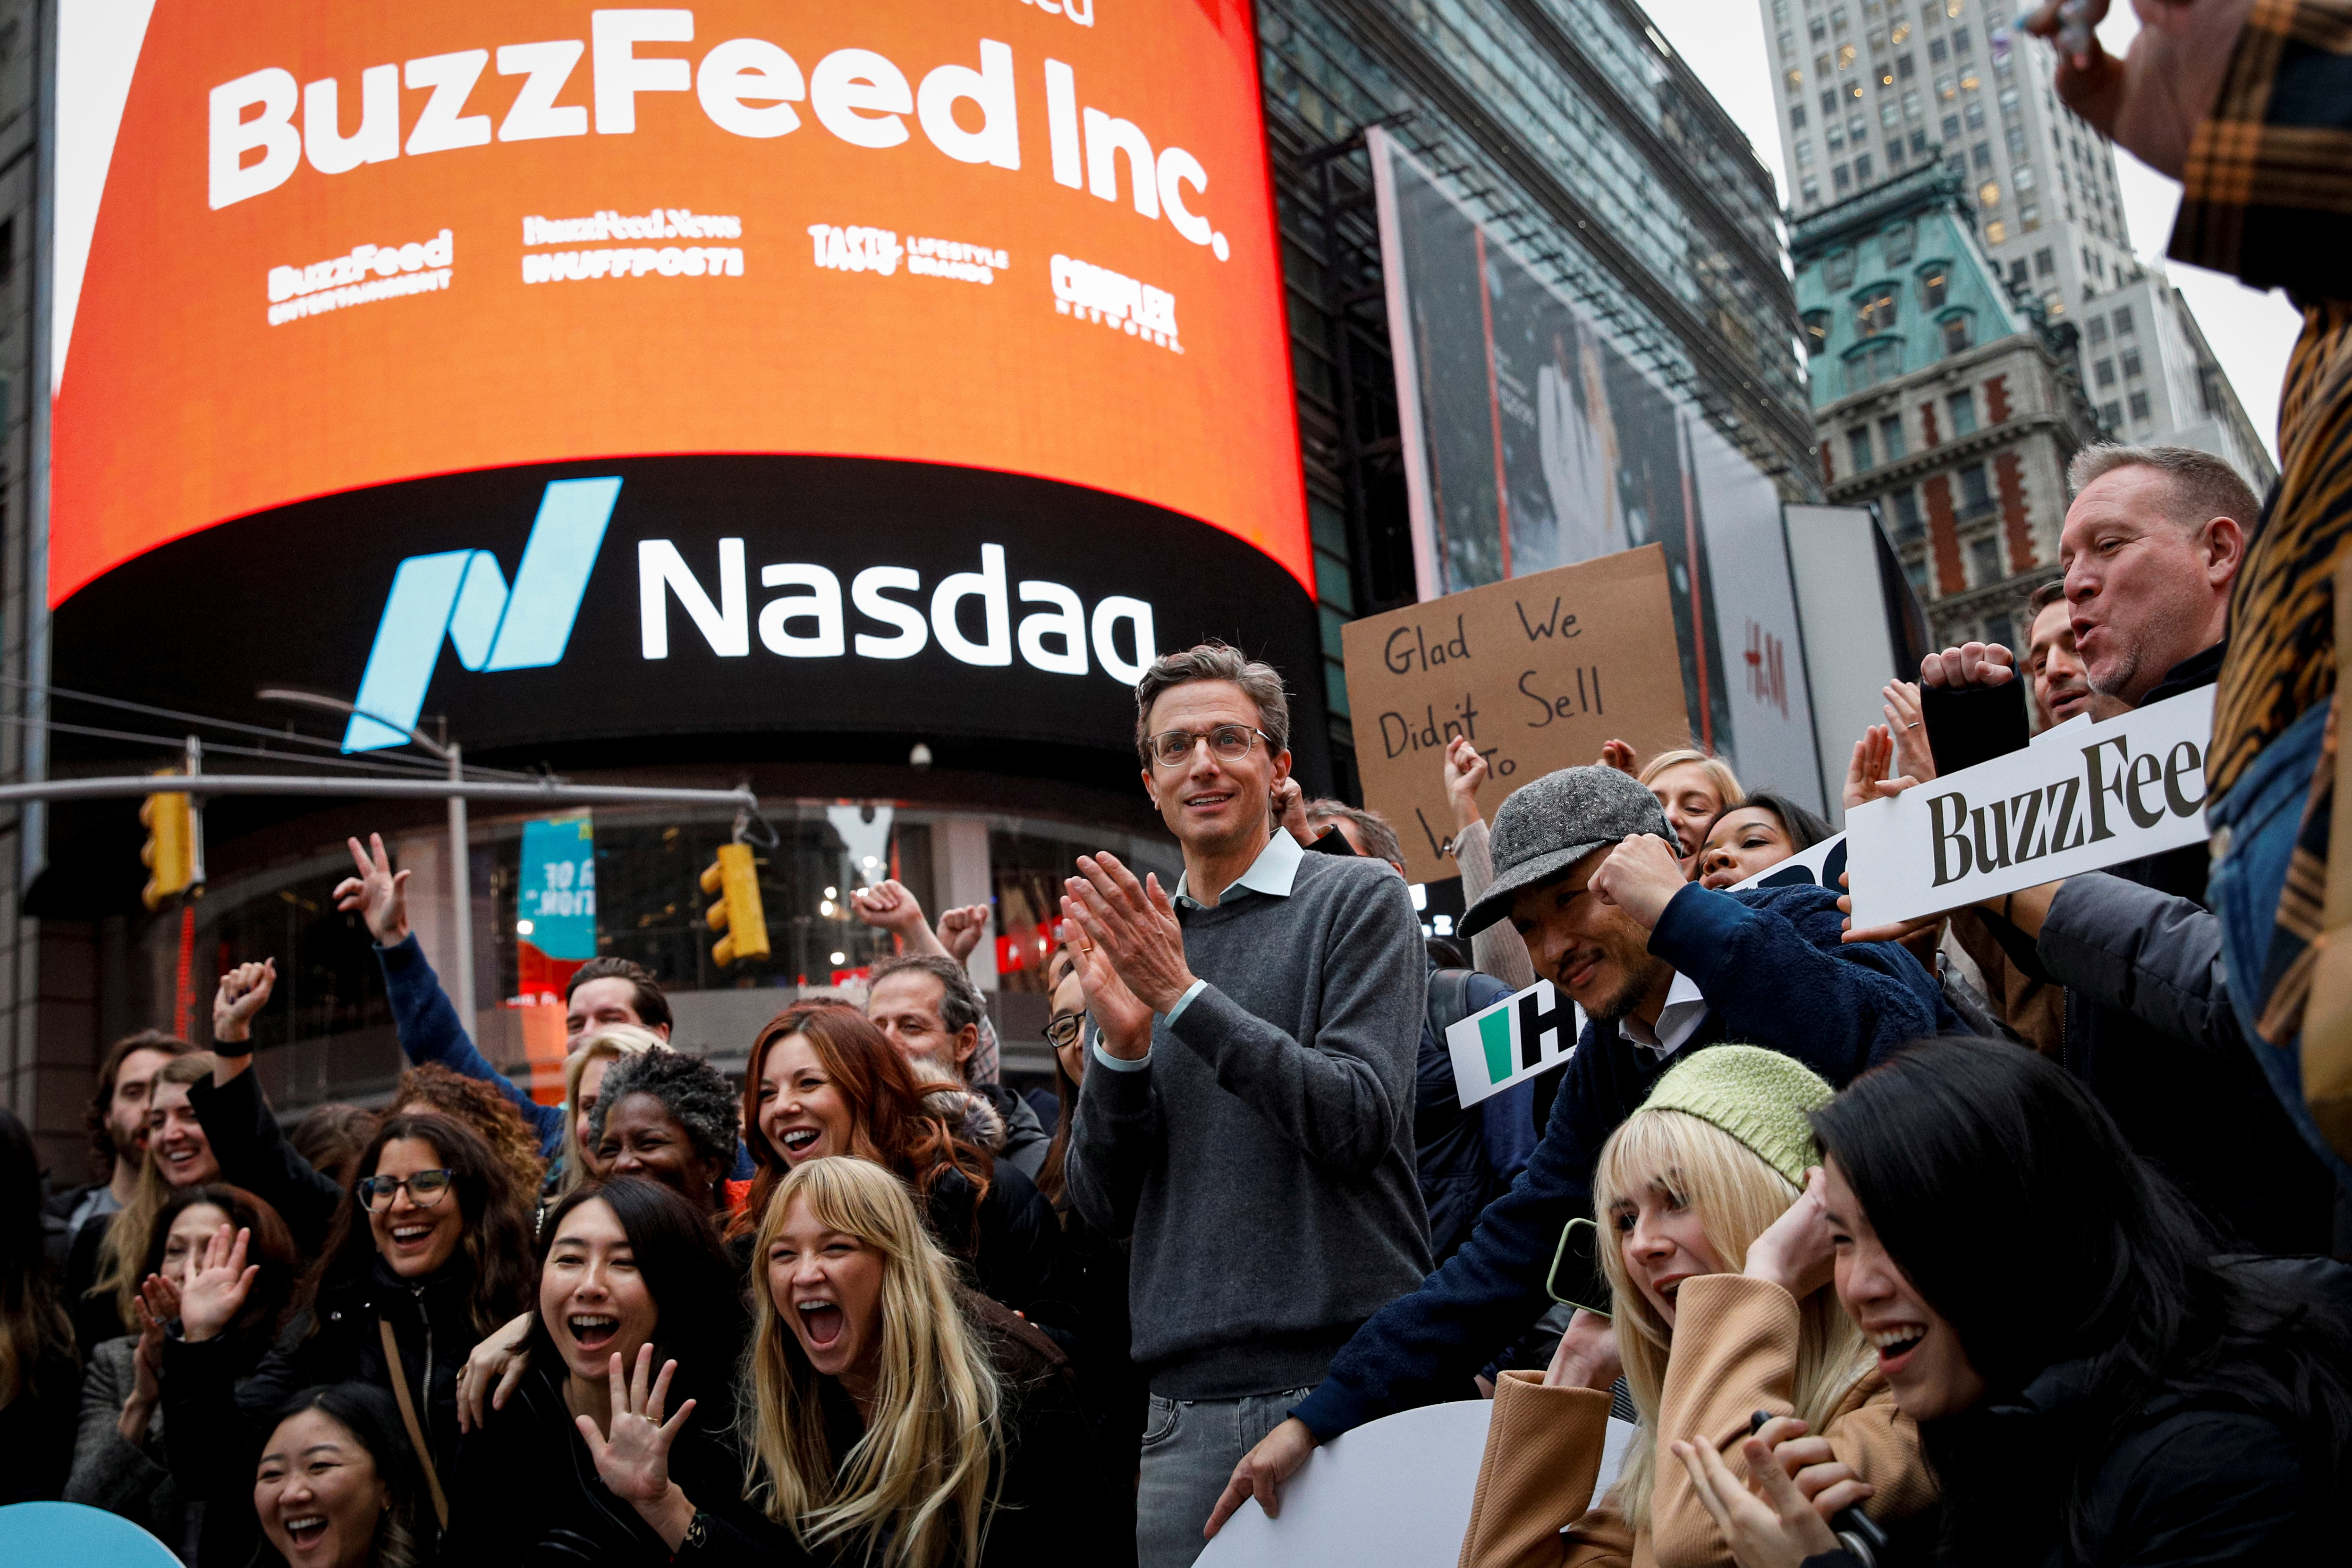 Jonah Peretti, founder and CEO of BuzzFeed, poses with employees to celebrate the company's debut outside the Nasdaq Market in Times Square in New York City, U.S., December 6, 2021.